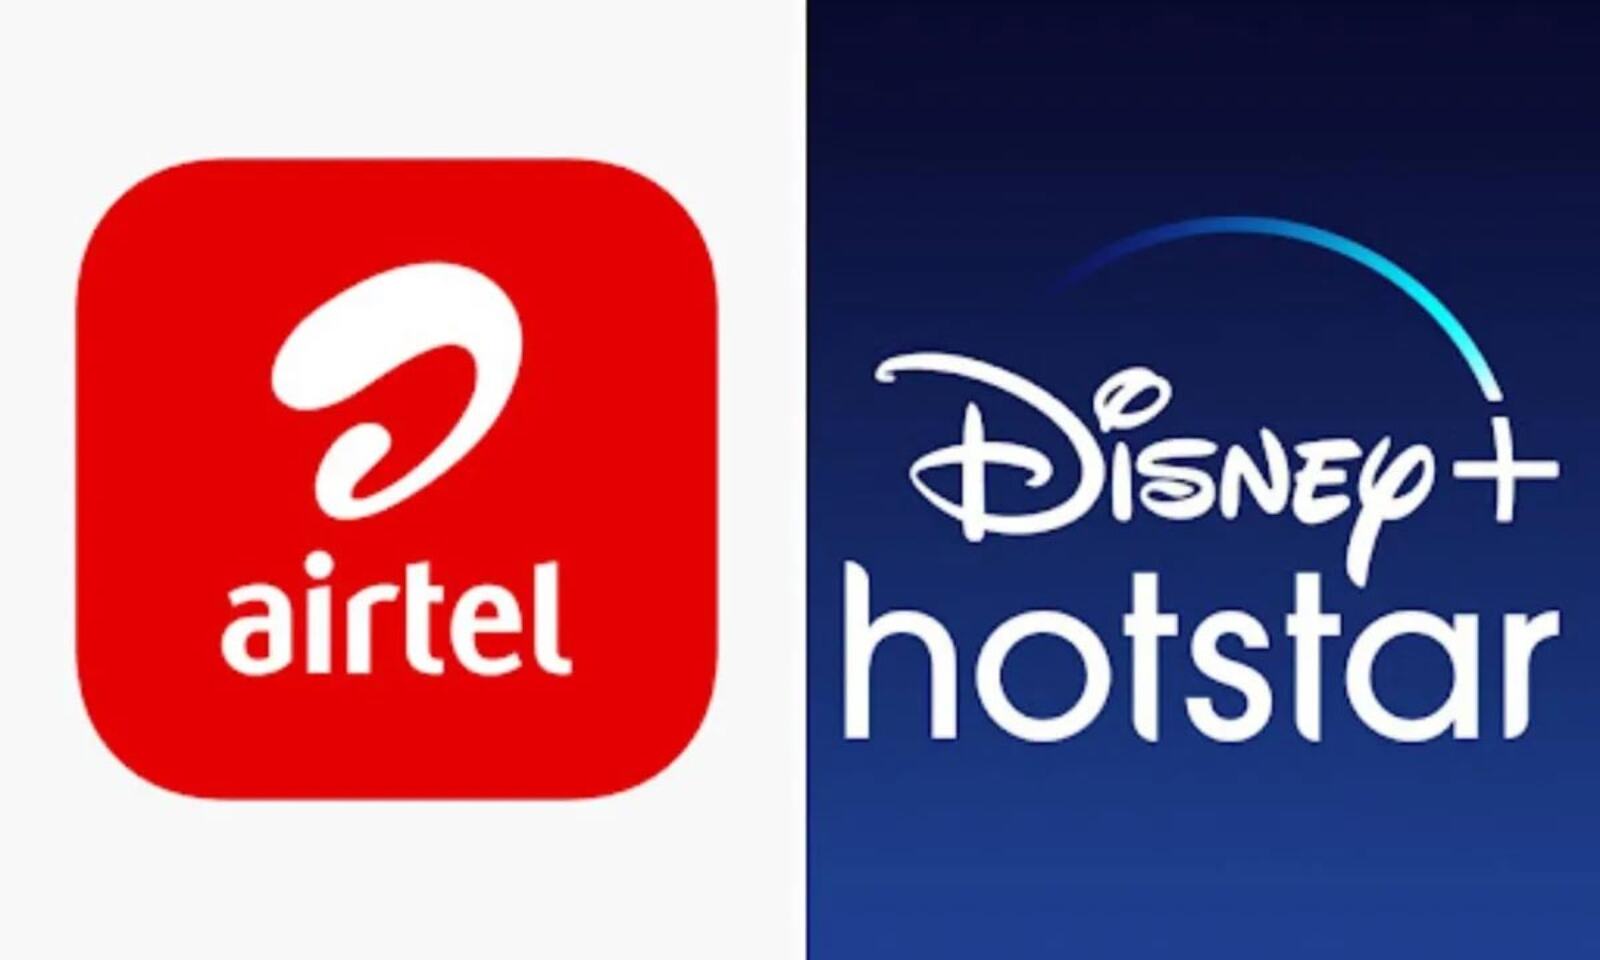 Why can't just Disney+ Hotstar logo use the same STAR logo and be like as  in the picture below? : r/DisneyPlusHotstar